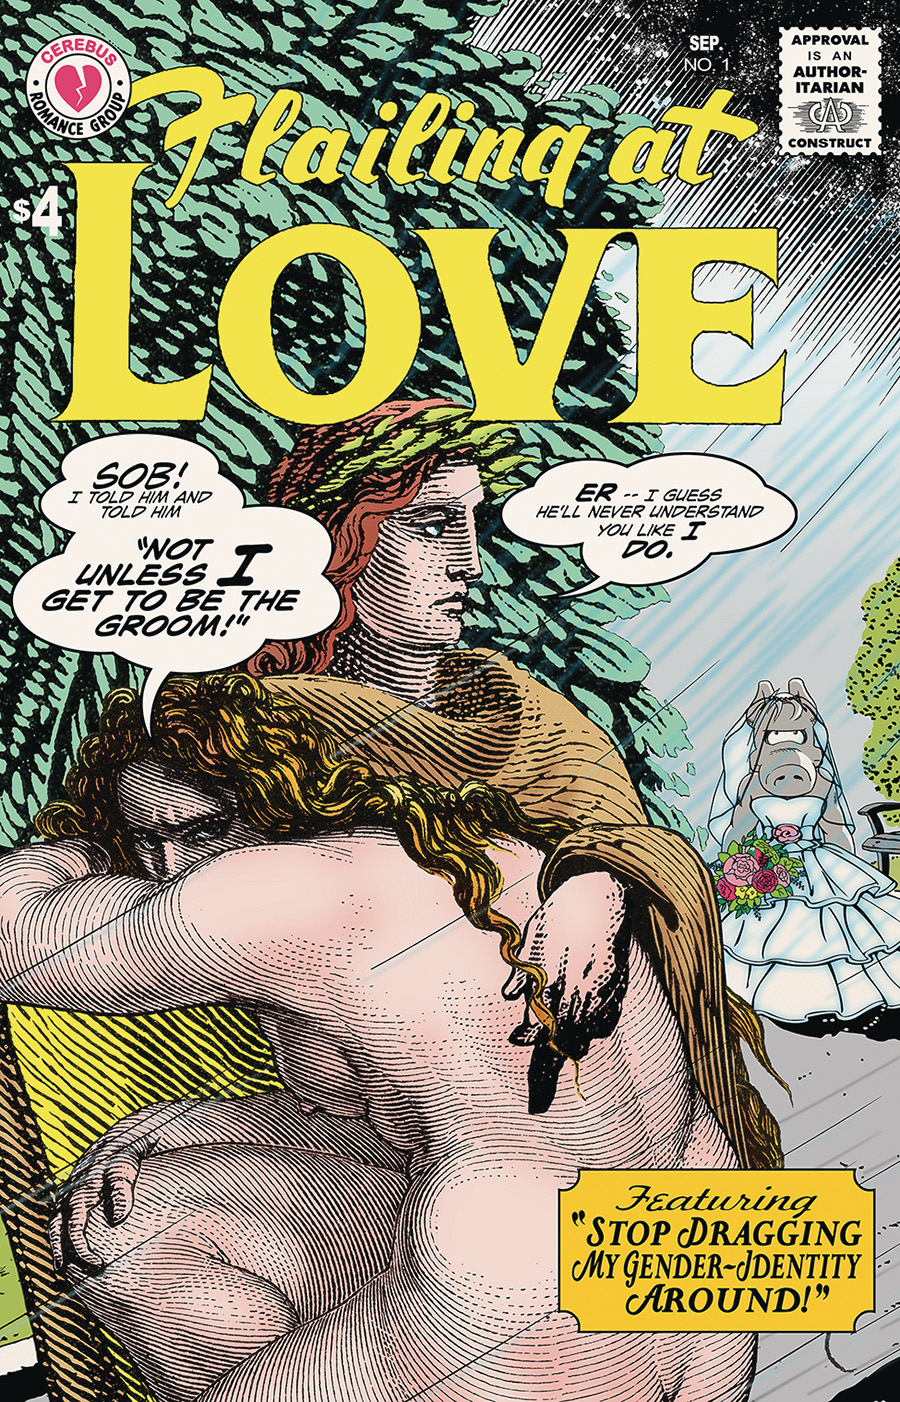 Cerebus In Hell Presents Flailing At Love #1 (One Shot)